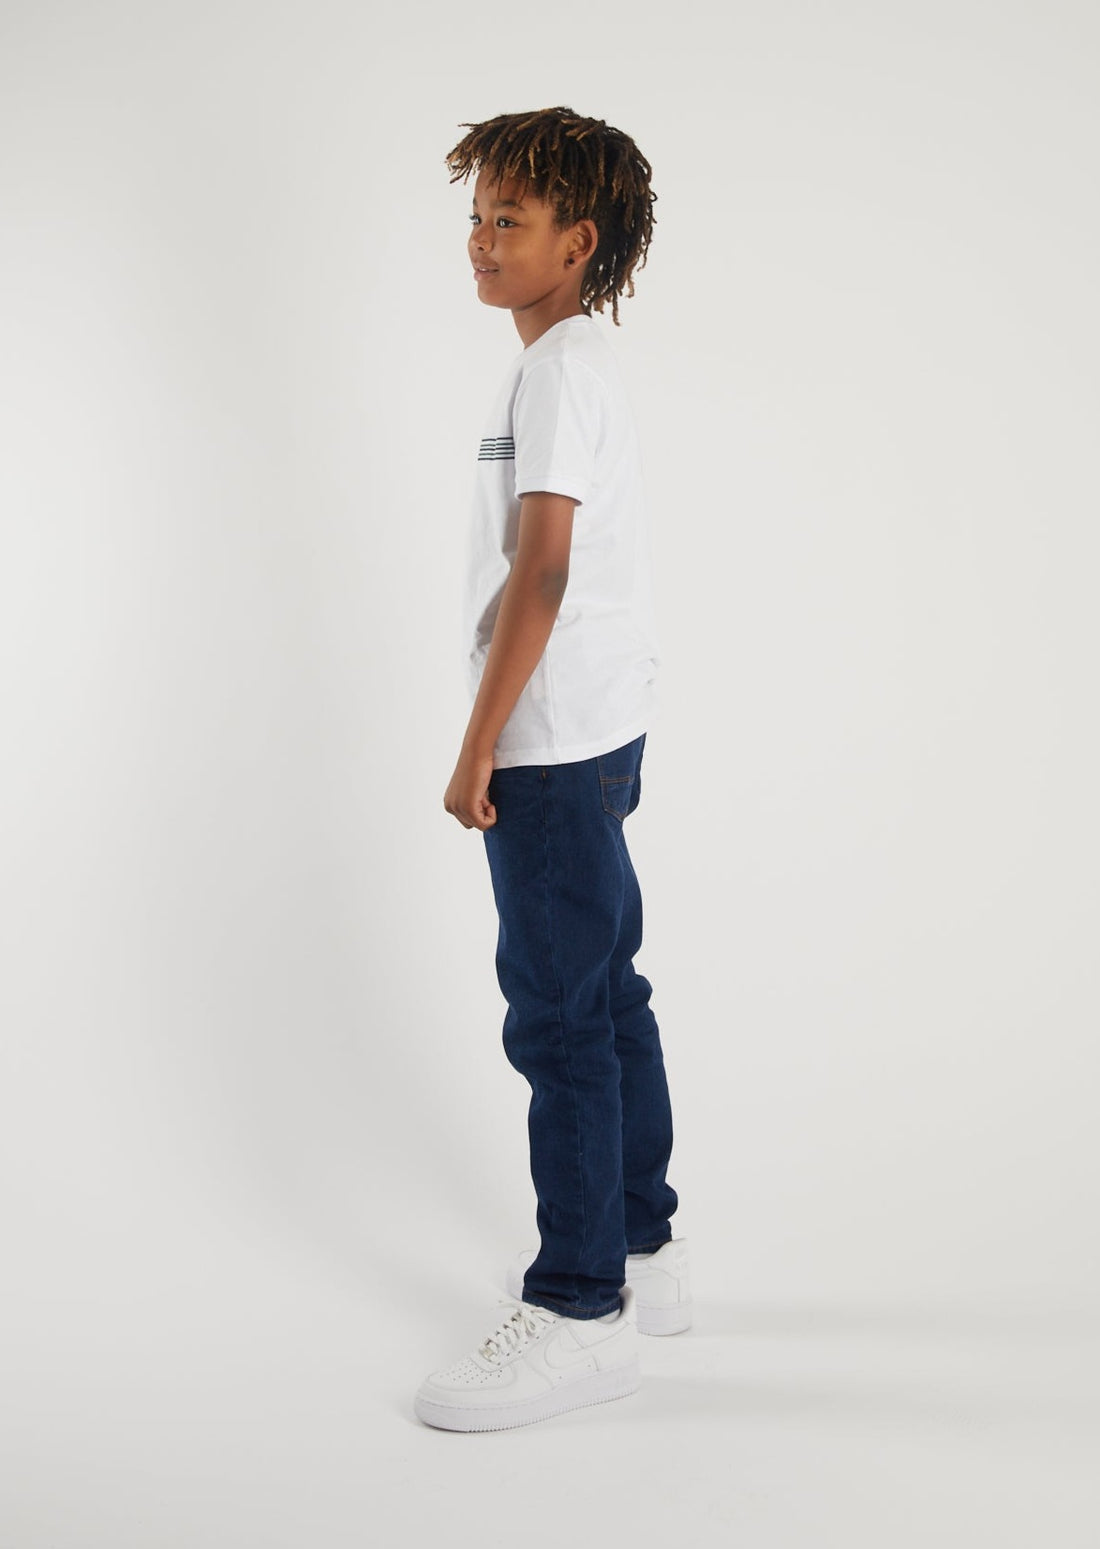 Boy's Ernest Tee - White-Model Side View